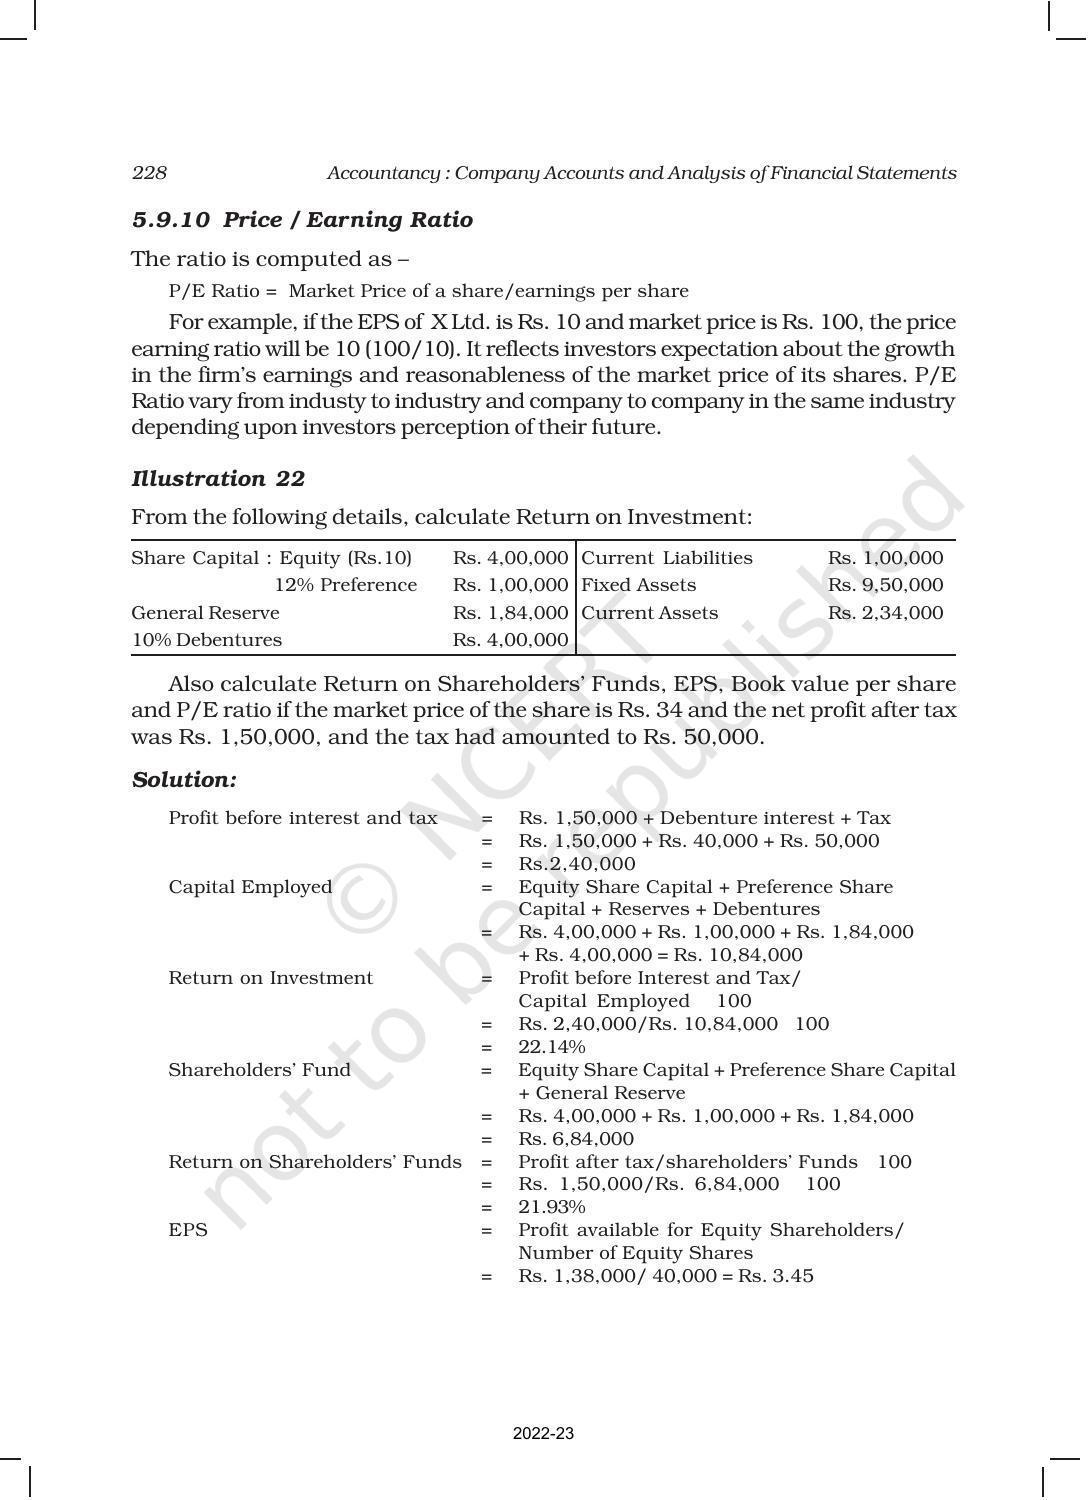 NCERT Book for Class 12 Accountancy Part II Chapter 5 Accounting Ratios - Page 35